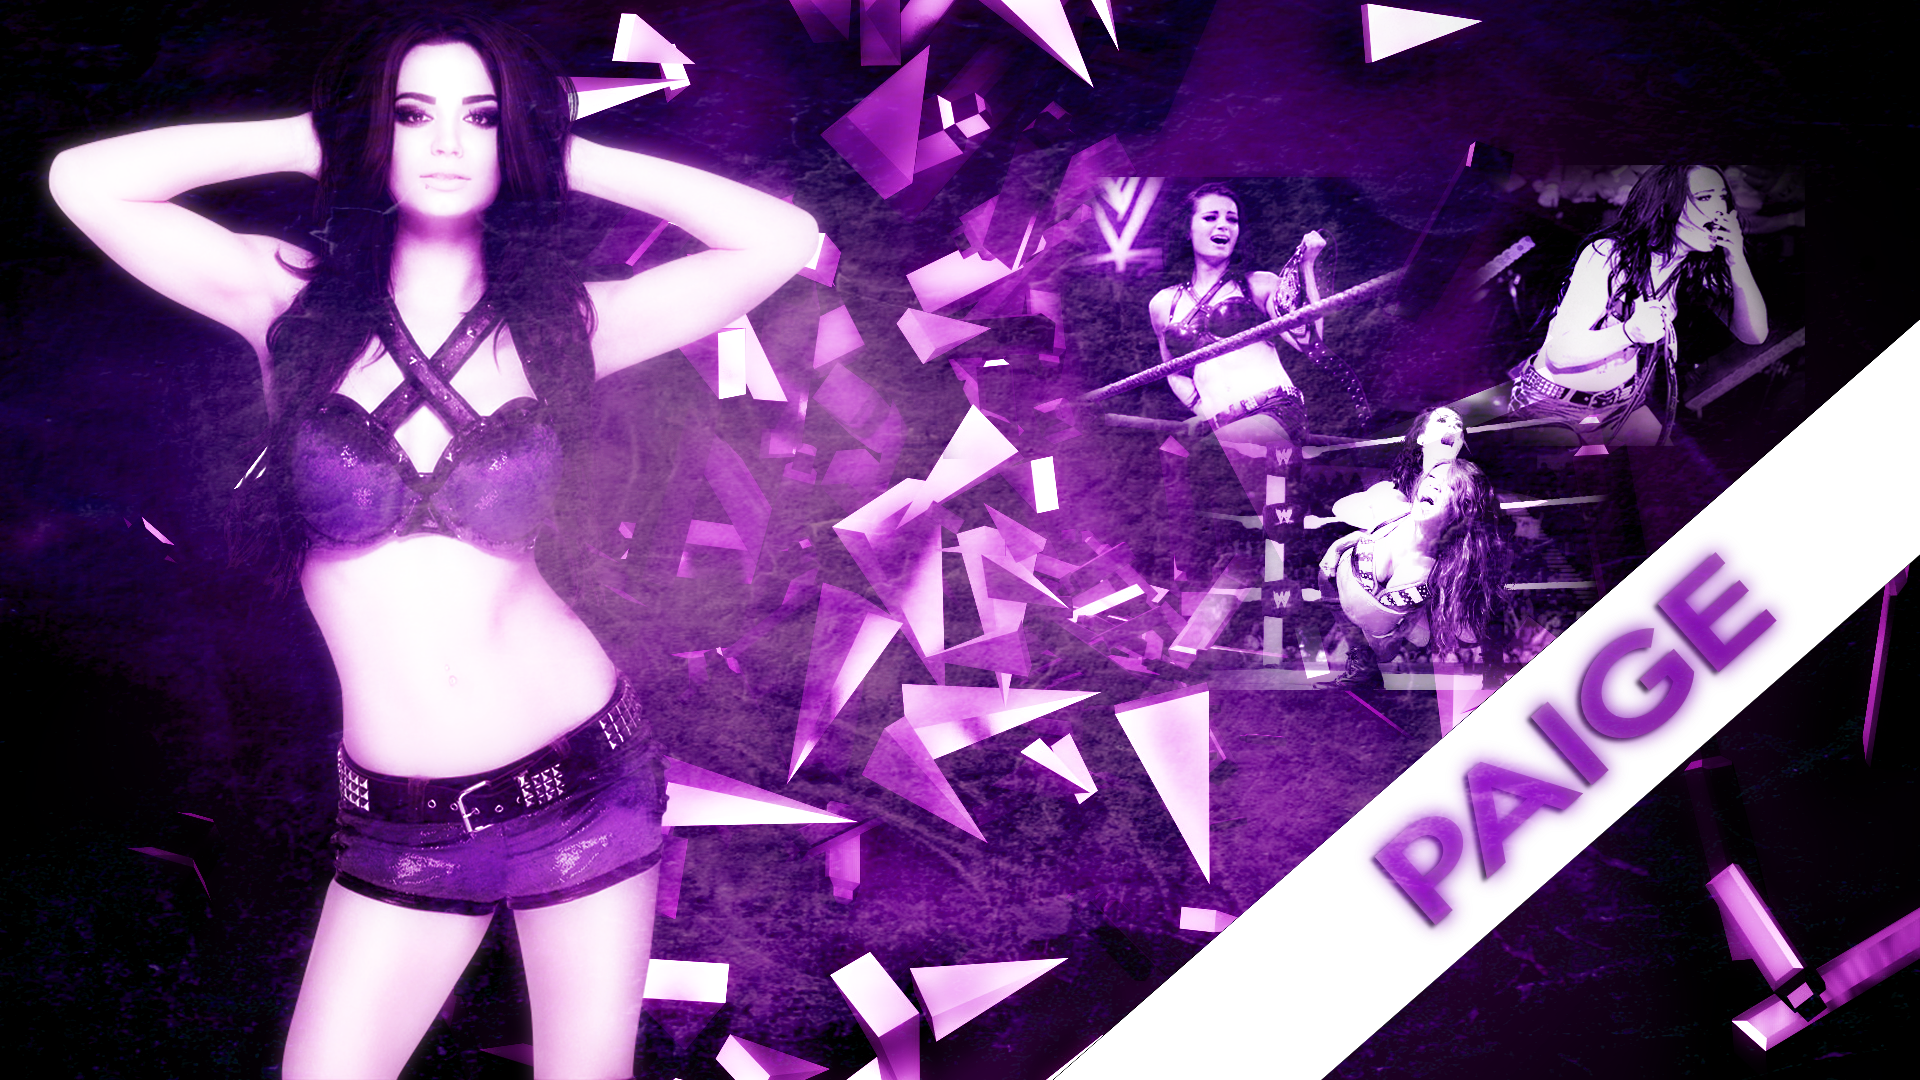 Top Paige Wwe Diva Wallpapers Wallpapers